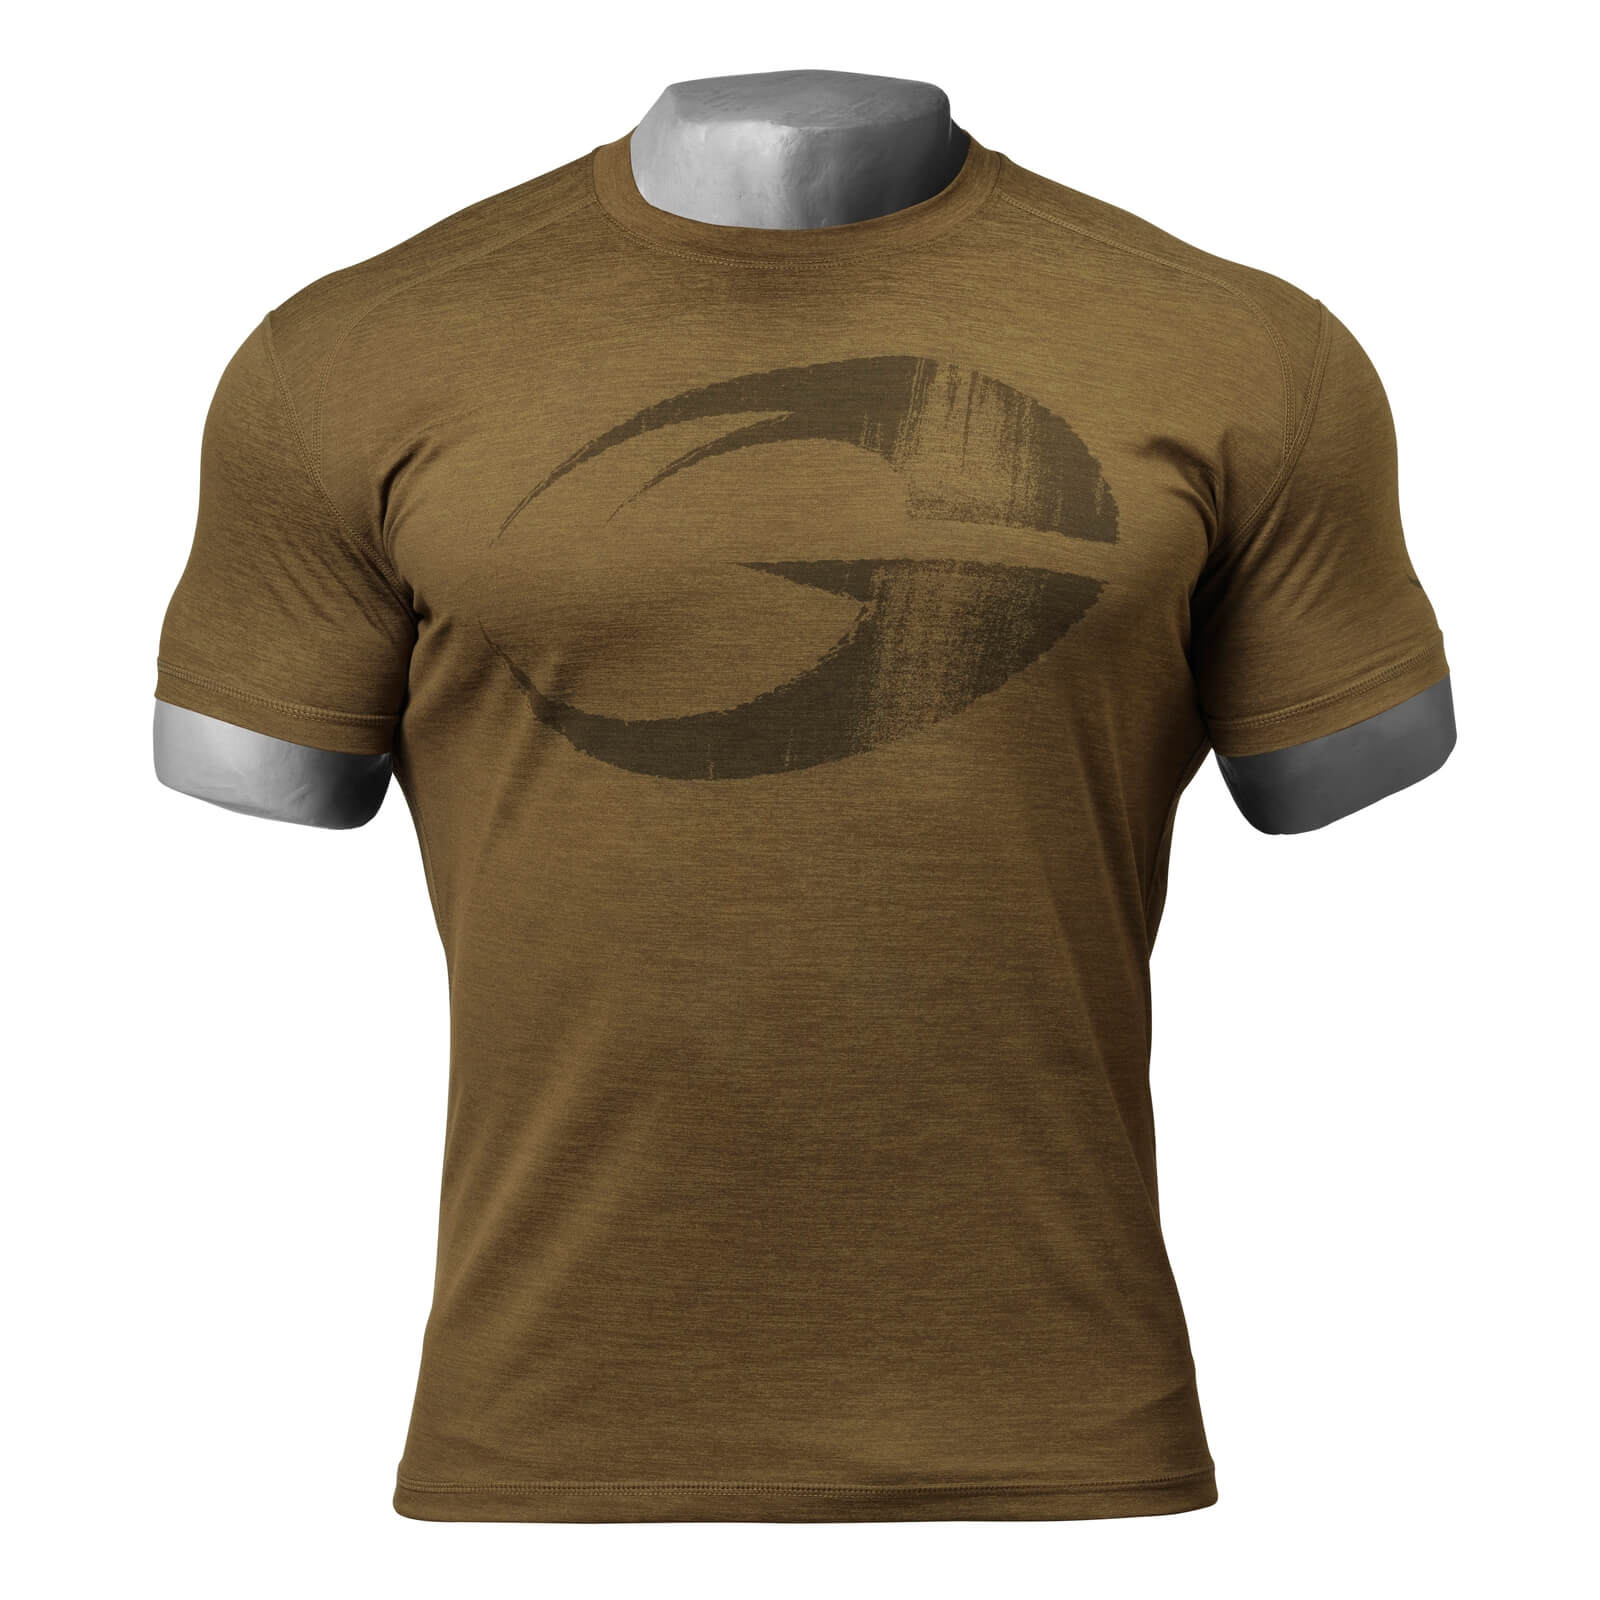 Ops Edition Tee, military olive, GASP